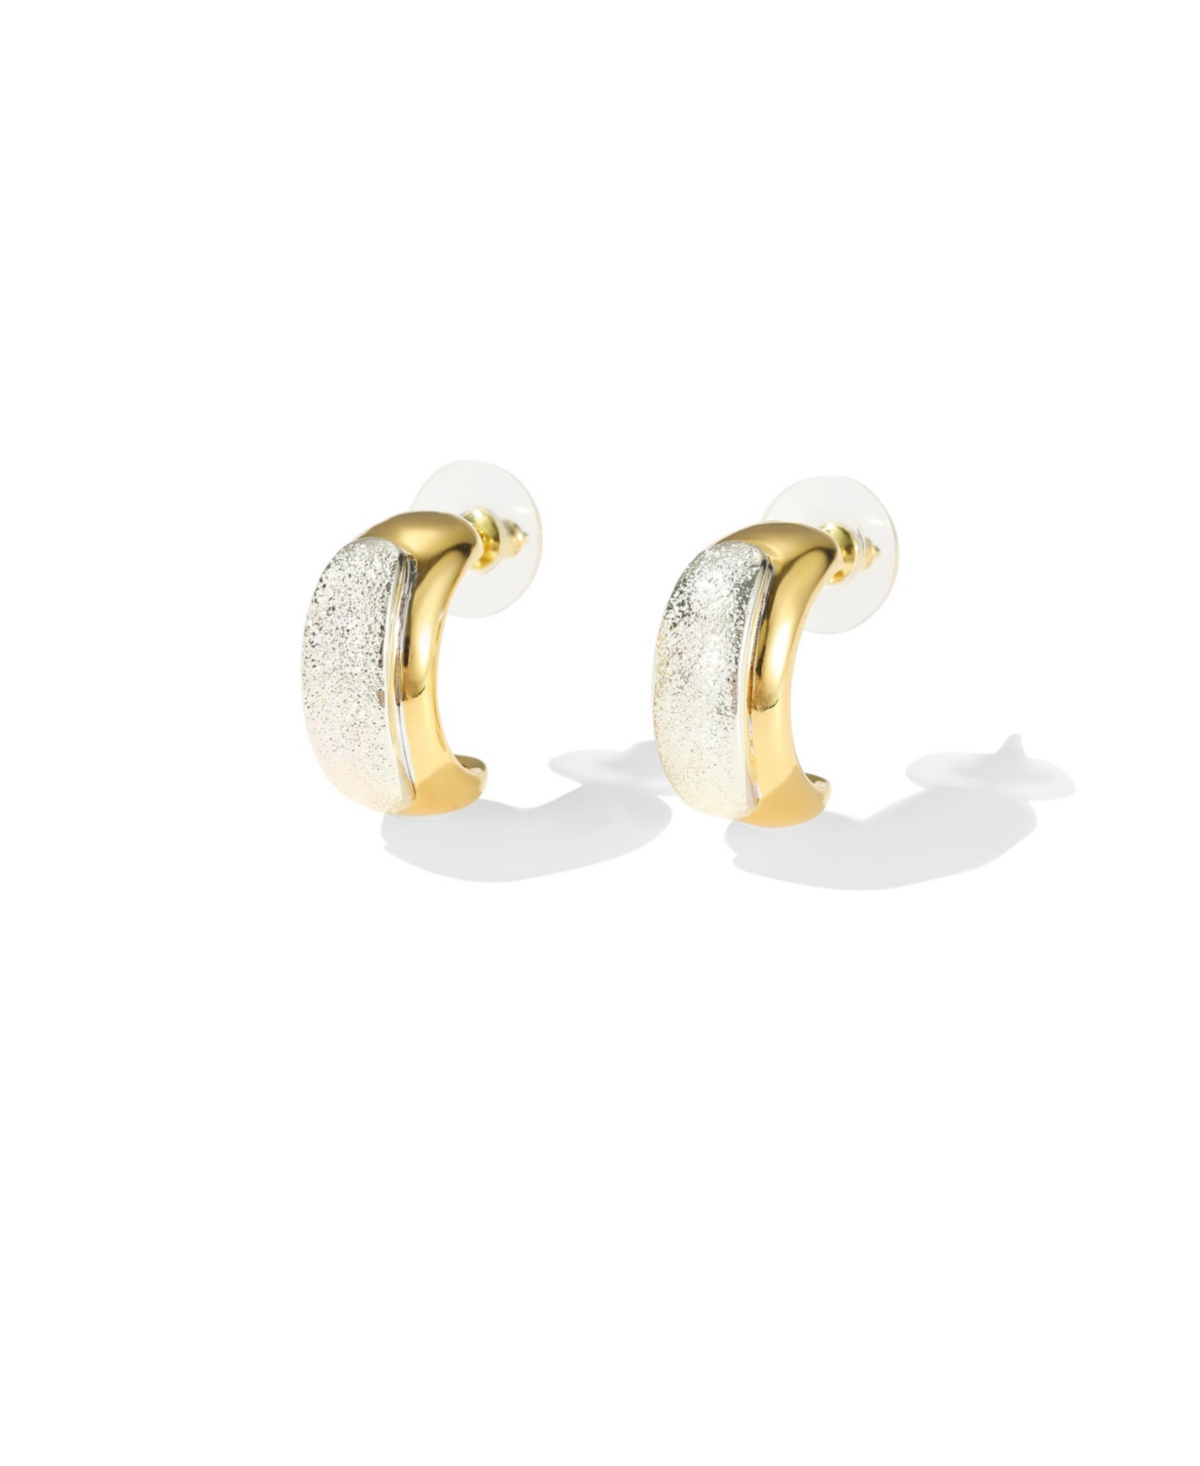 Frosted and Matted Texture Two Tone Hoop Earrings - Gold